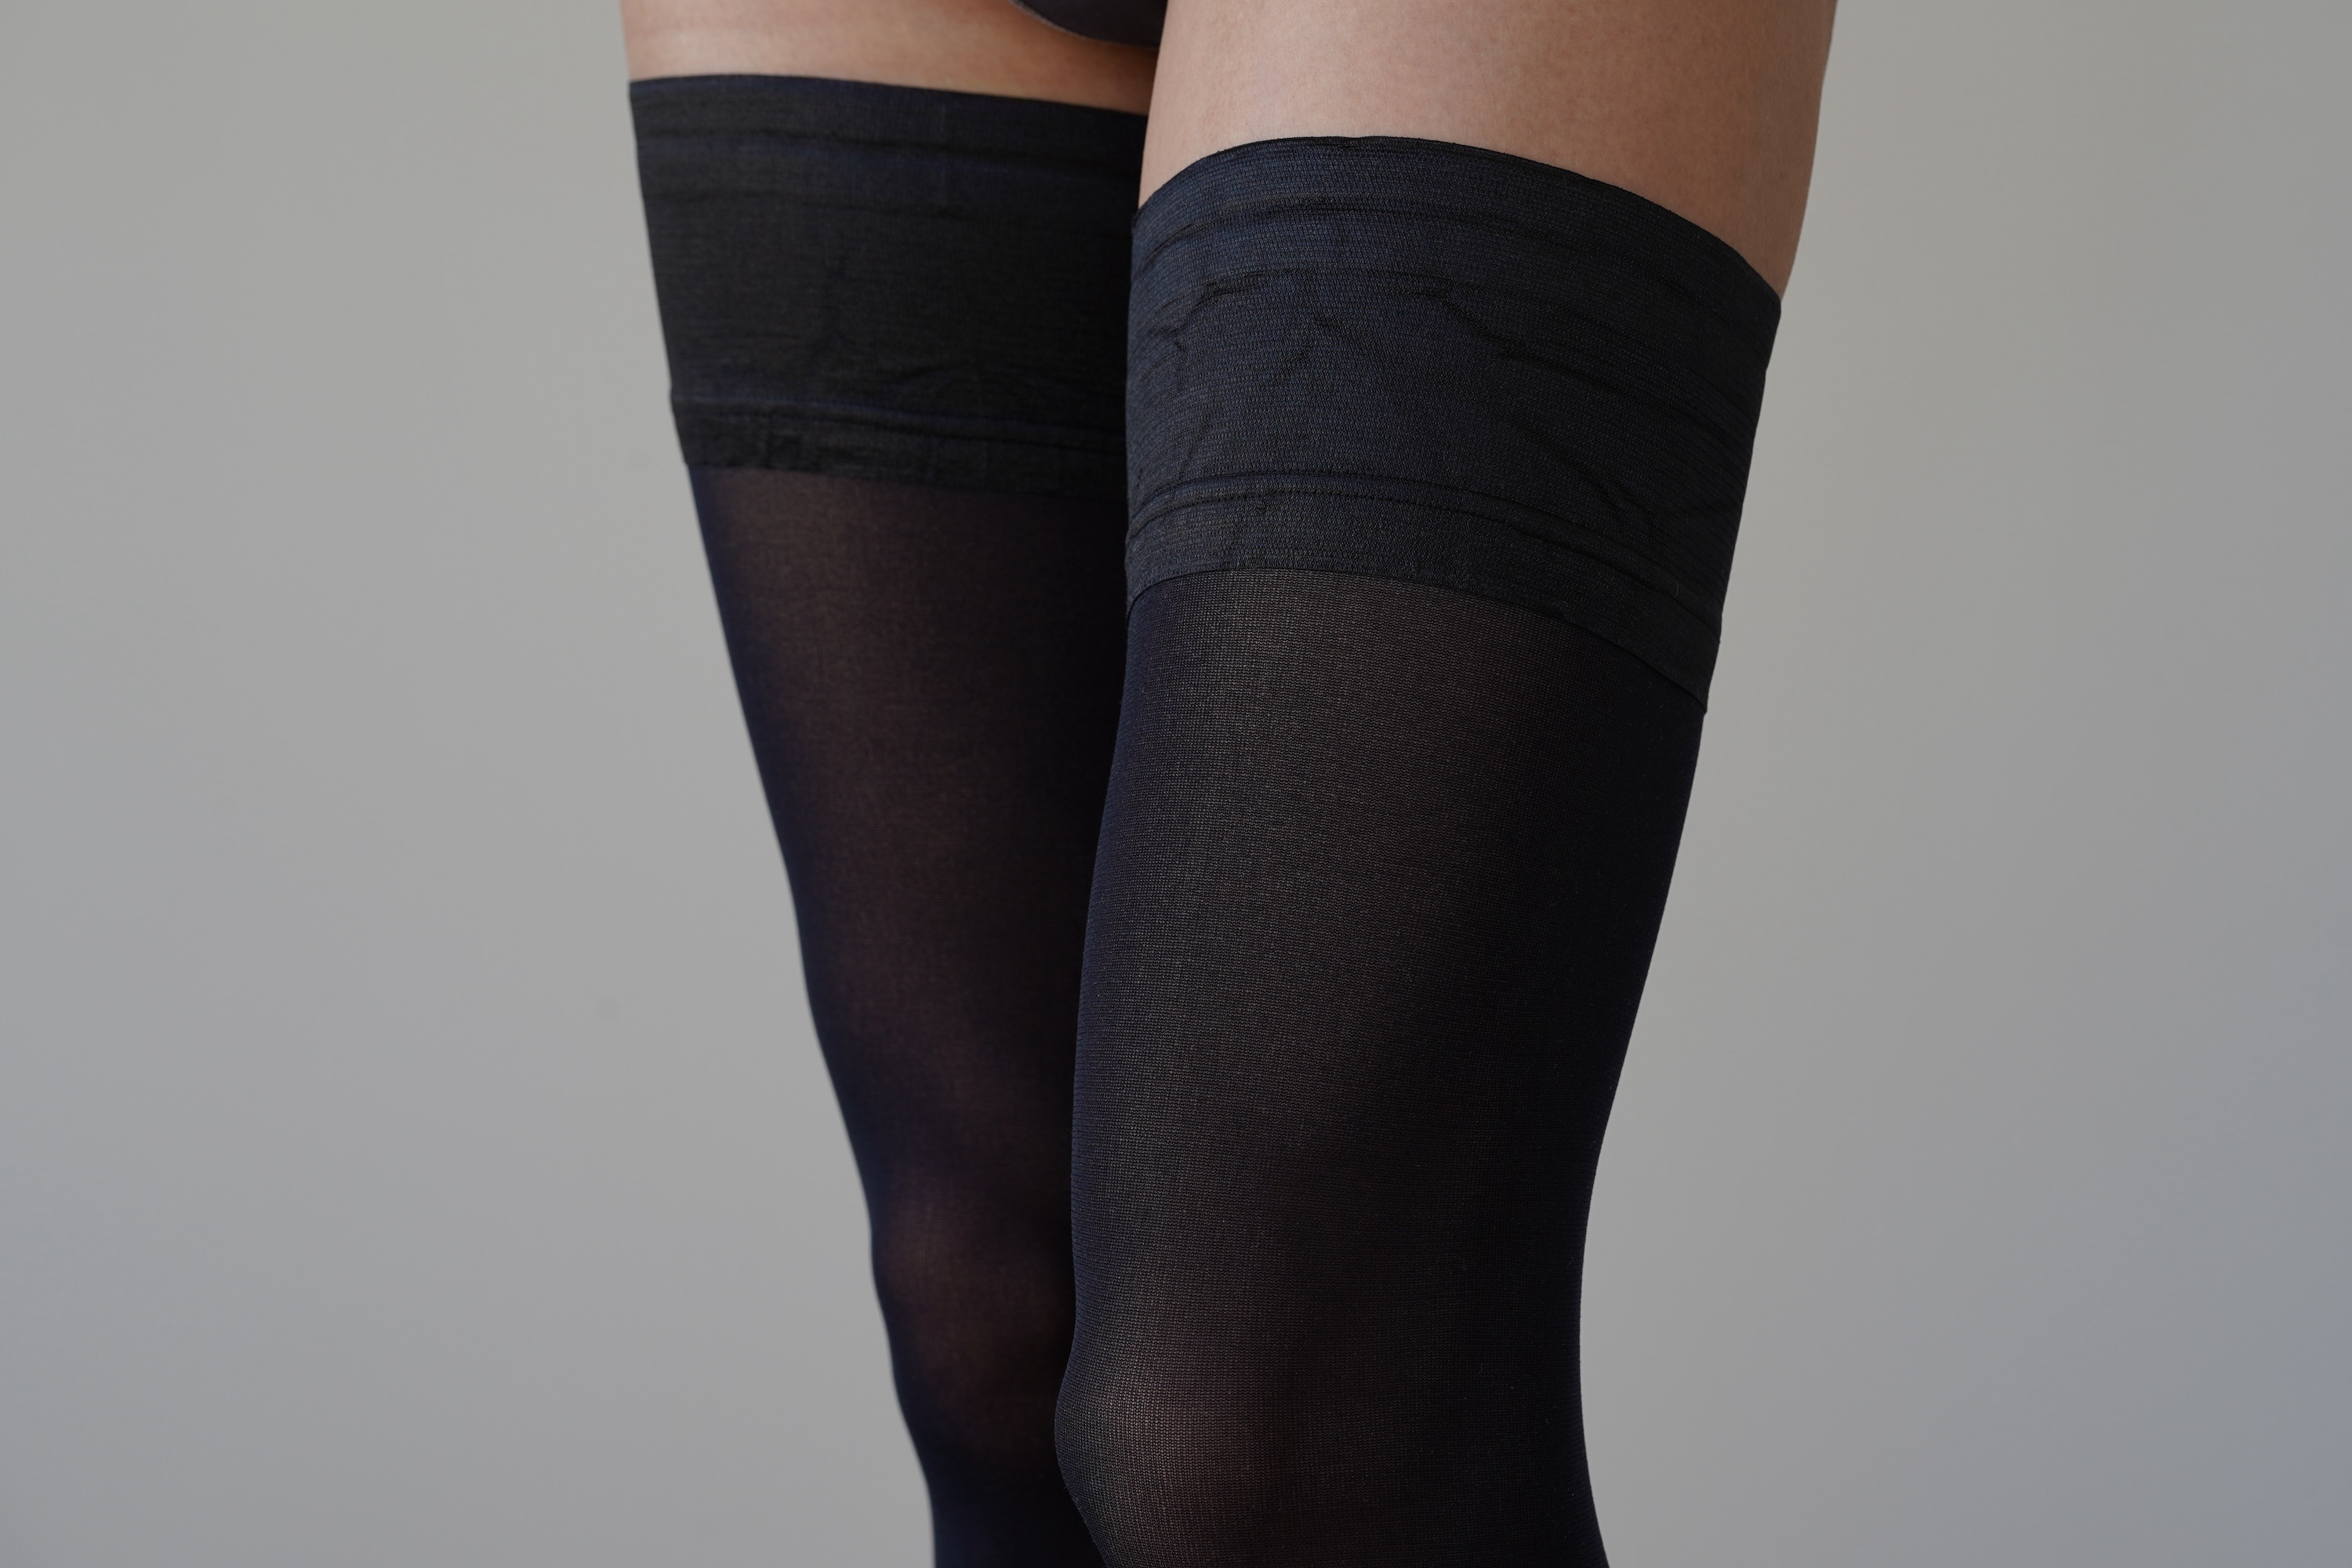 What are Opera Length Stockings – VienneMilano